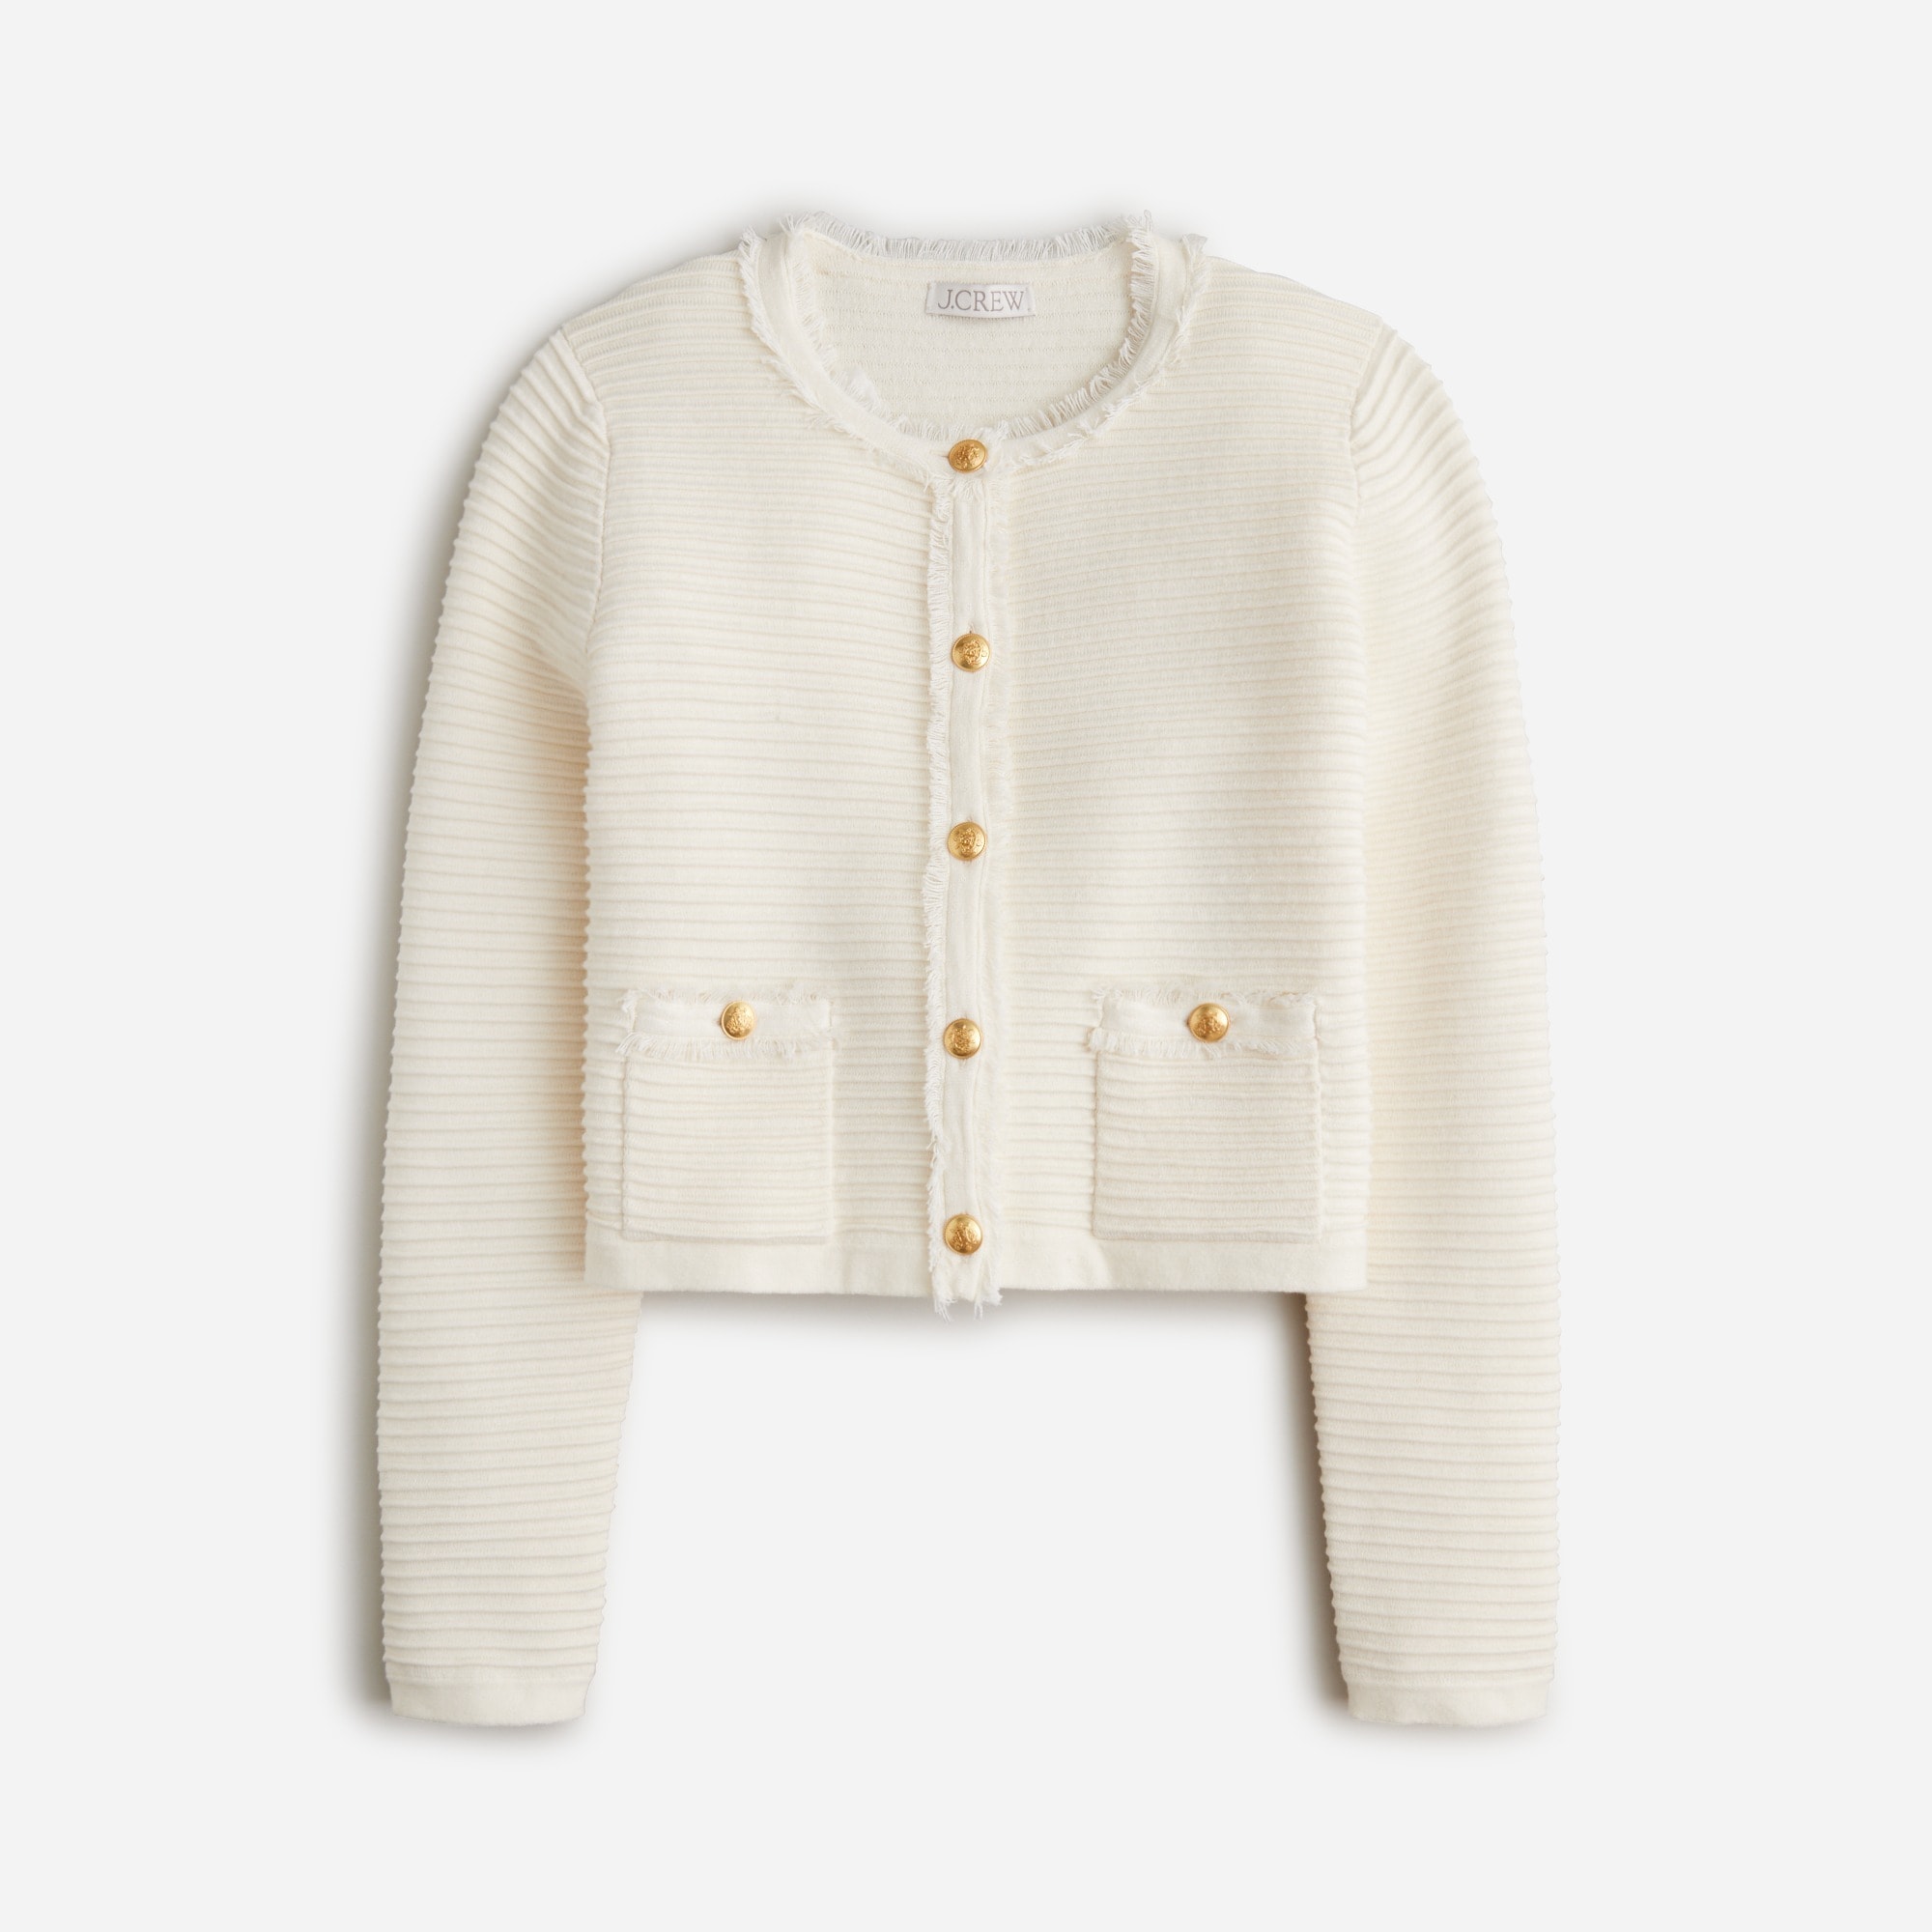  Emilie sweater lady jacket in textured cotton